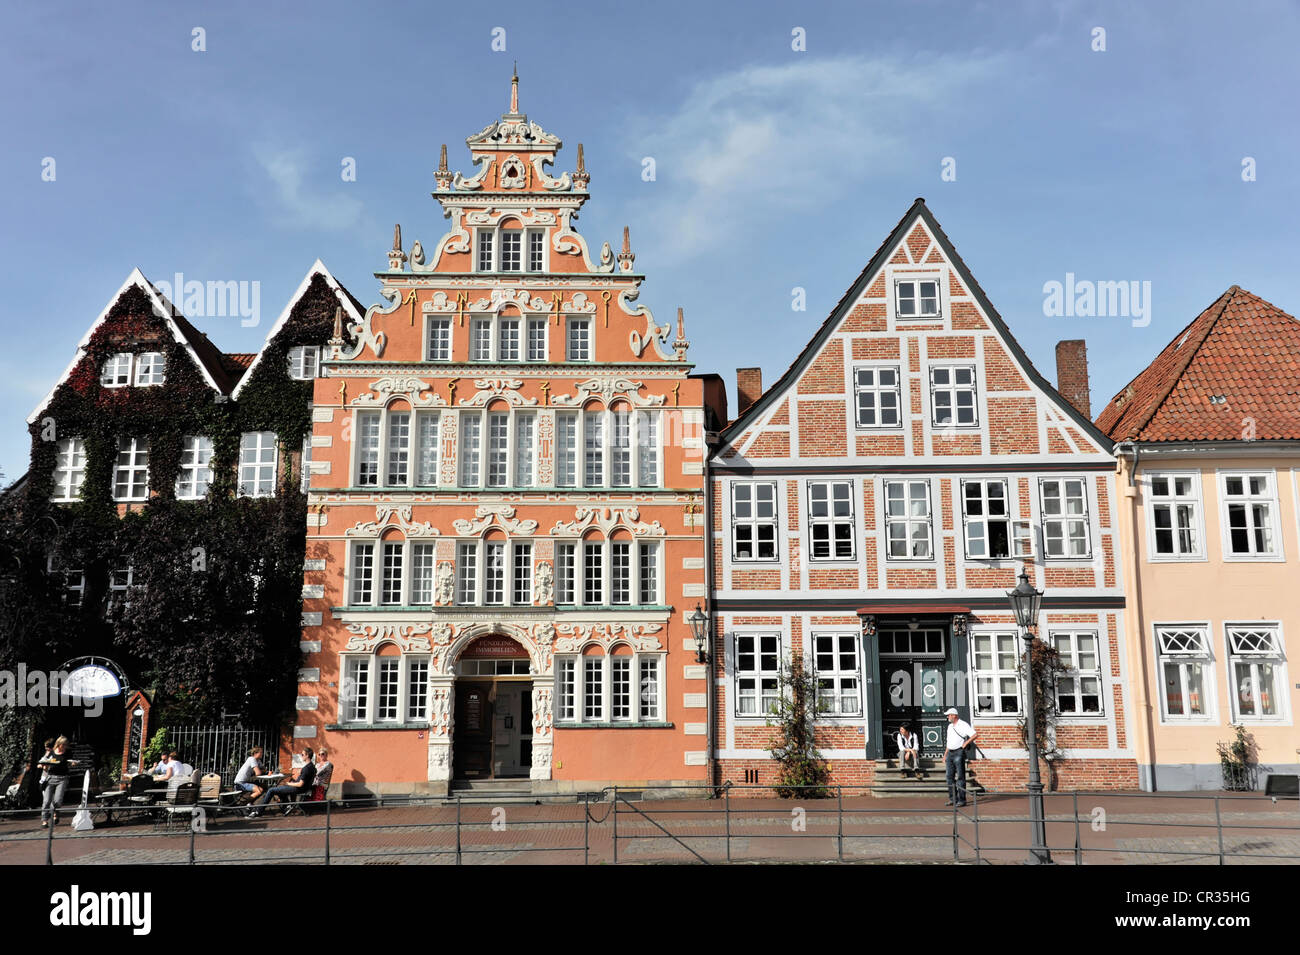 Historic gabled houses, Hanseatic town of Stade, Lower Saxony, Germany, Europe Stock Photo